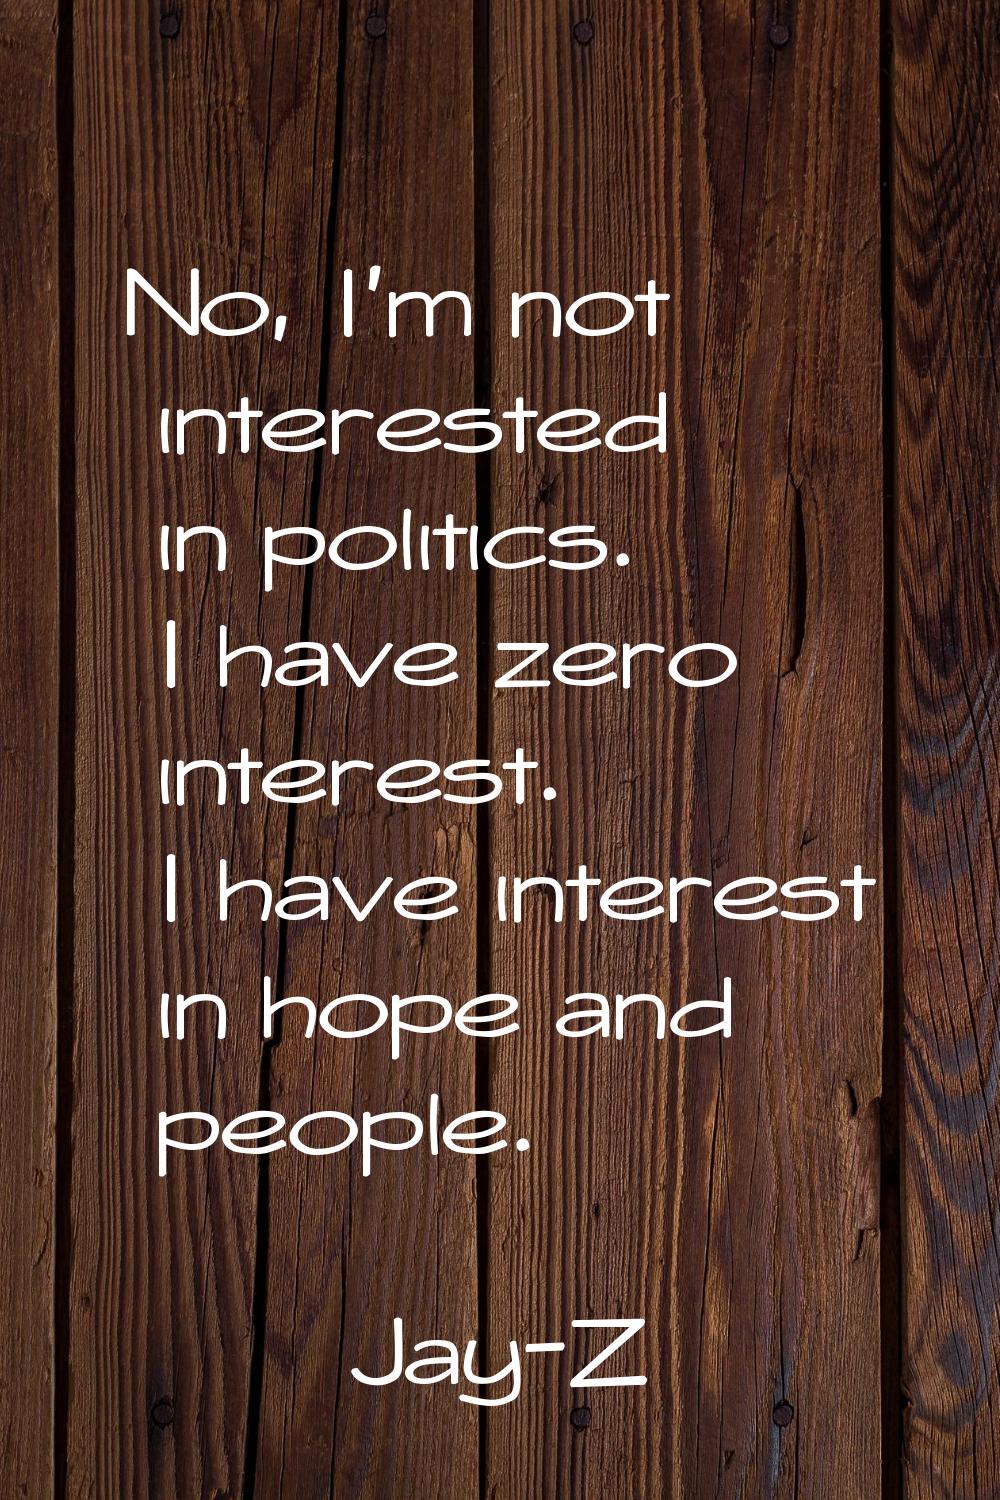 No, I'm not interested in politics. I have zero interest. I have interest in hope and people.